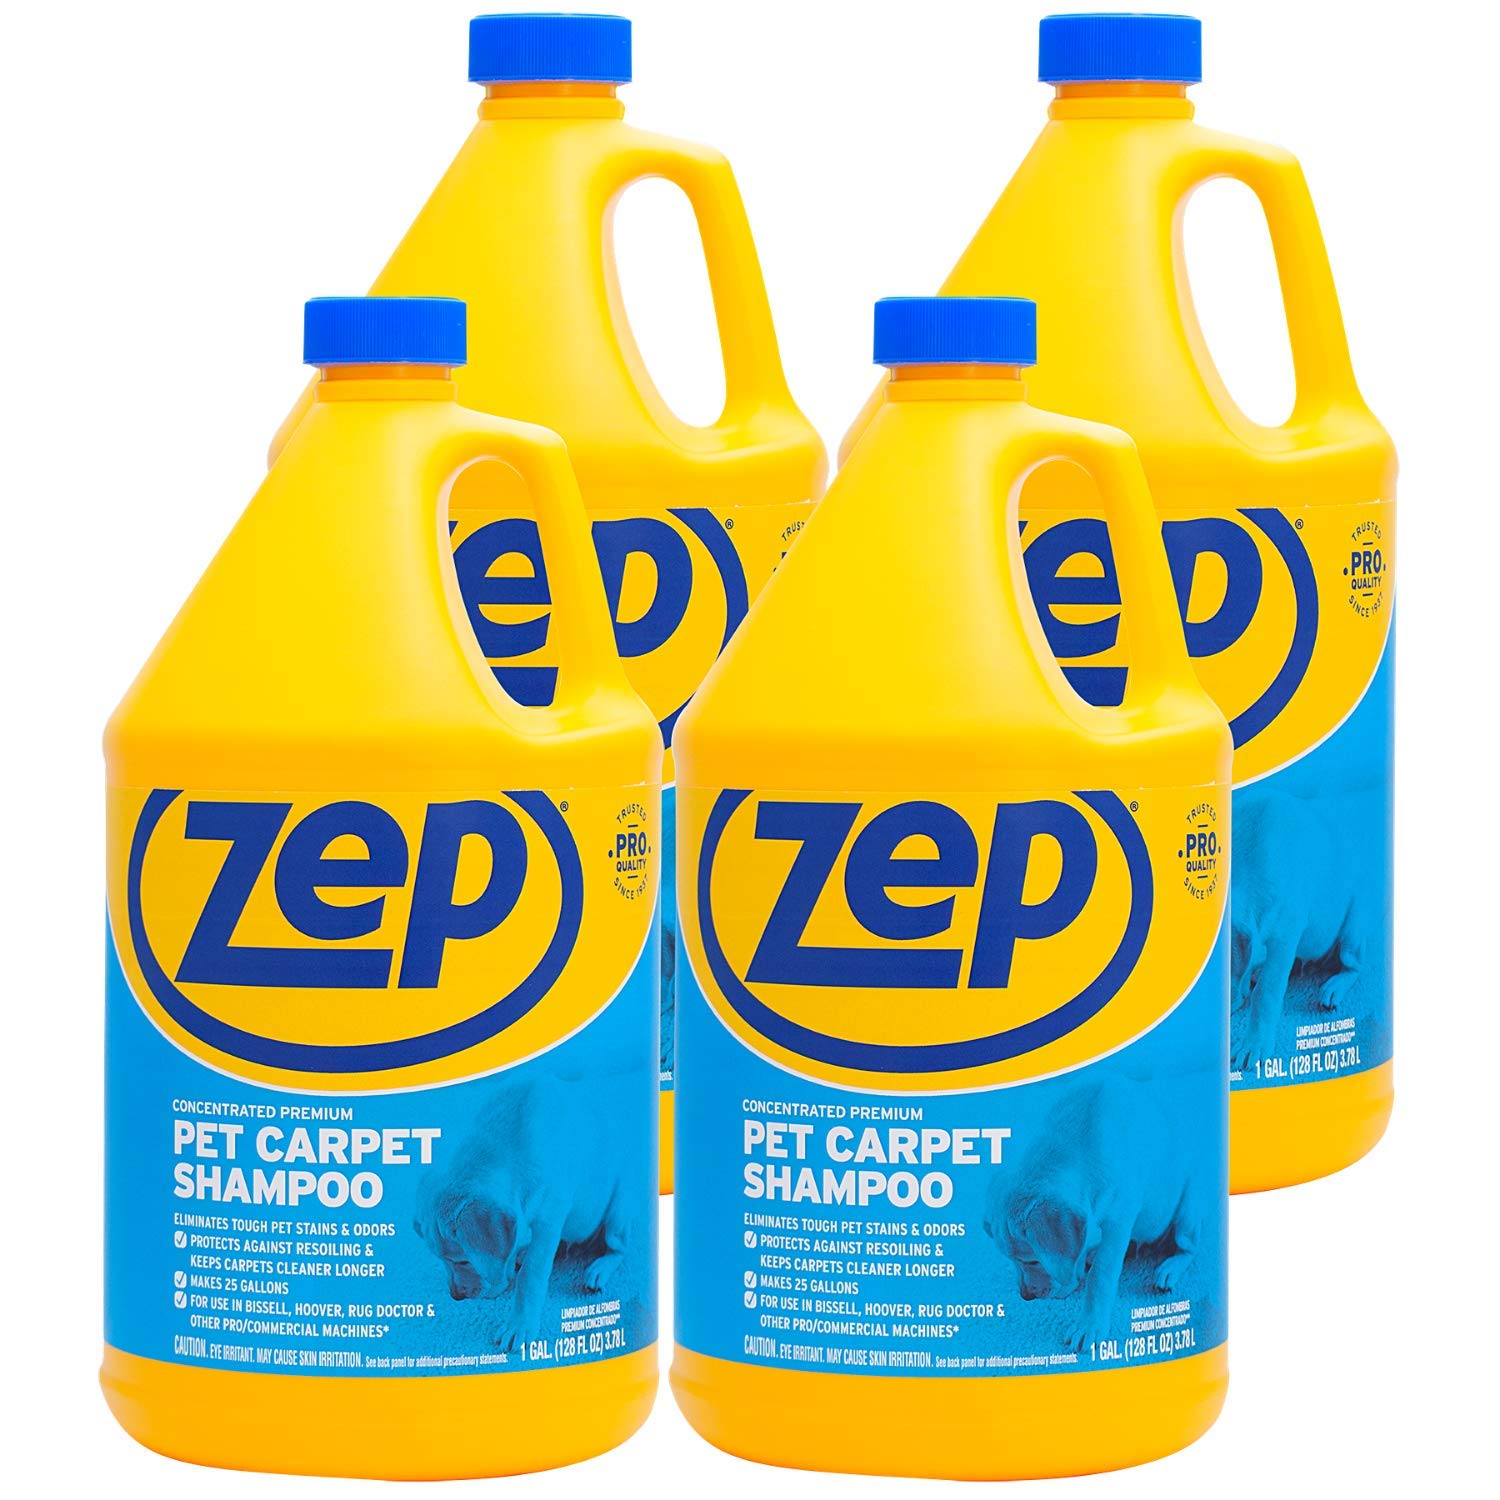 Zep Premium Pet Carpet Shampoo 128 ounce ZUPPC128 (Case of 4) Concentrated Pro Formula Eliminates Tough Pet Stains and Odors